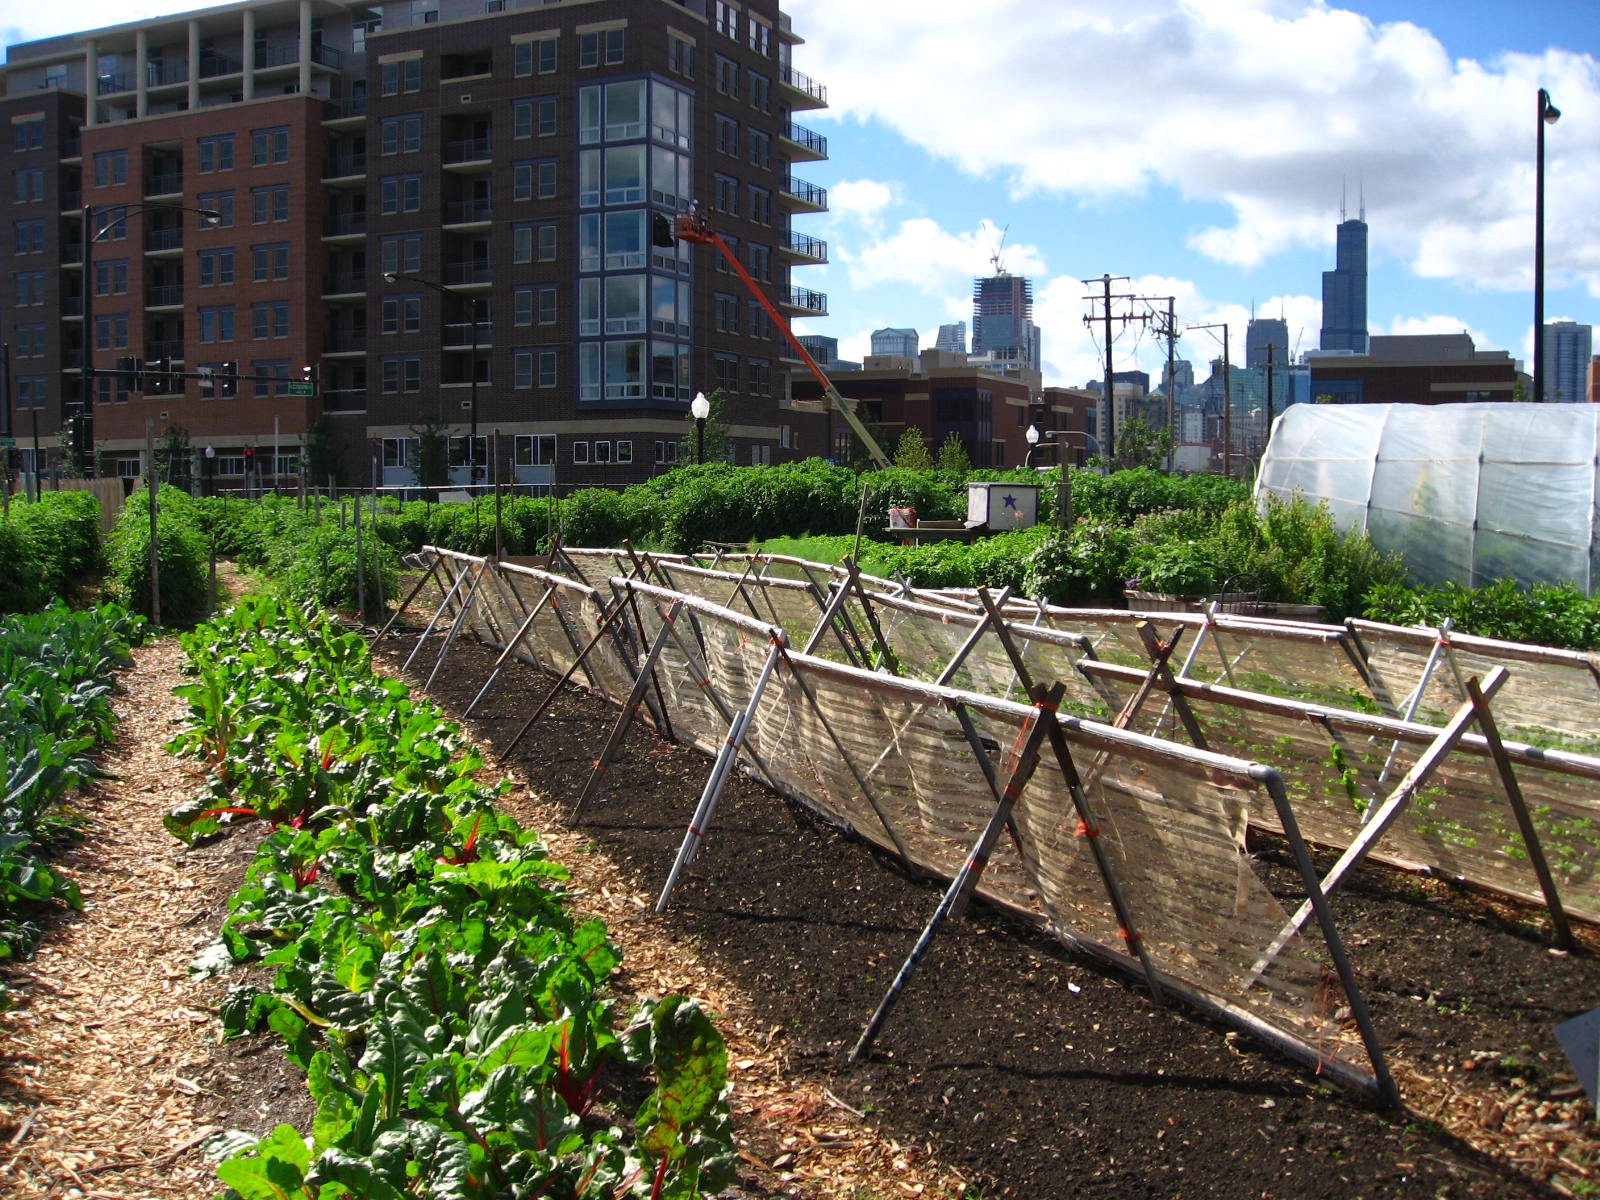 Seedlings protected by shade cloths with a city in the background.